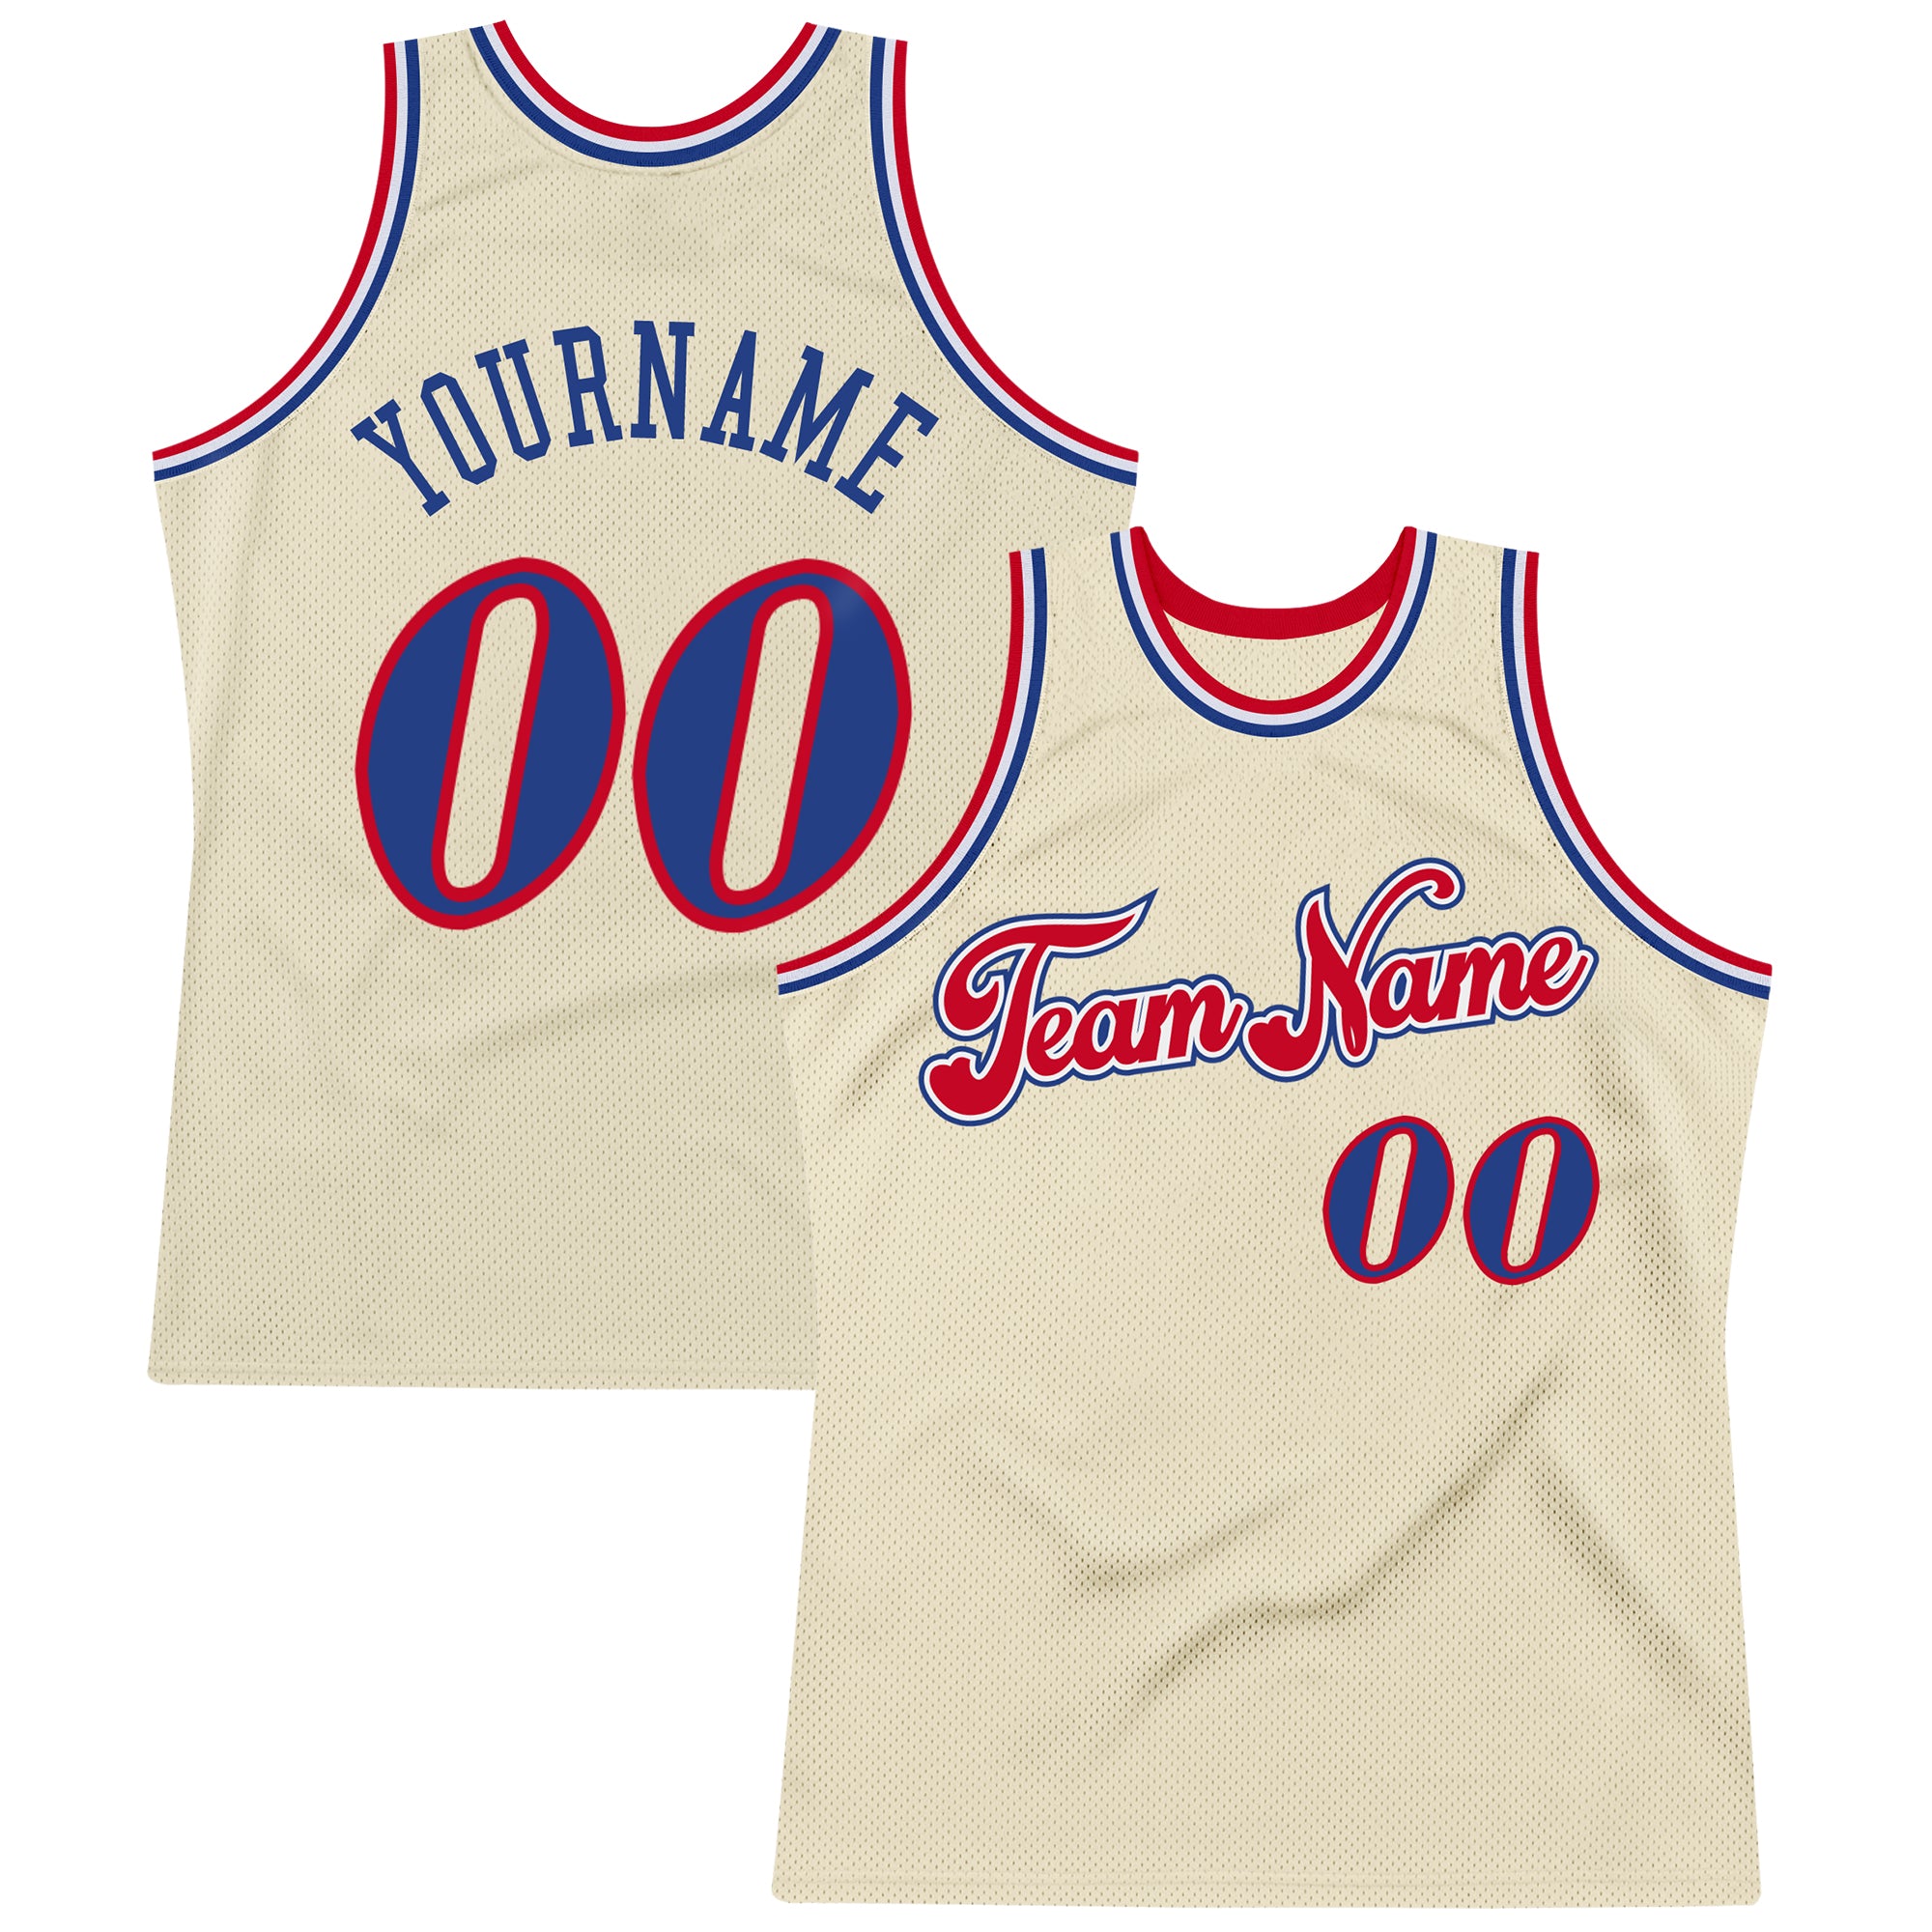 Custom Cream Royal-Red Authentic Throwback Basketball Jersey in